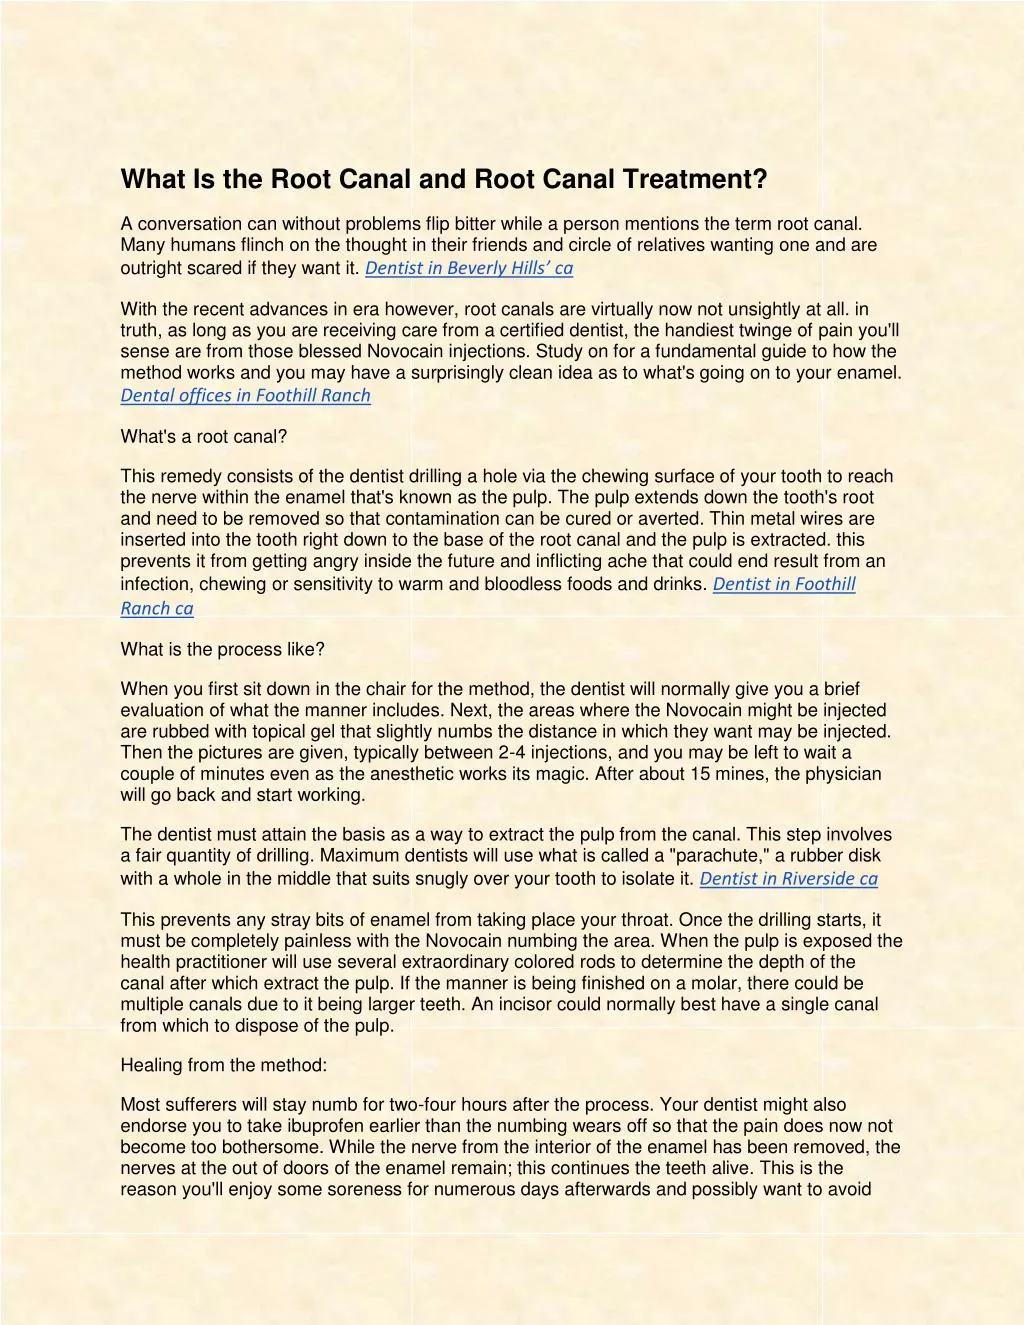 what is the root canal and root canal treatment